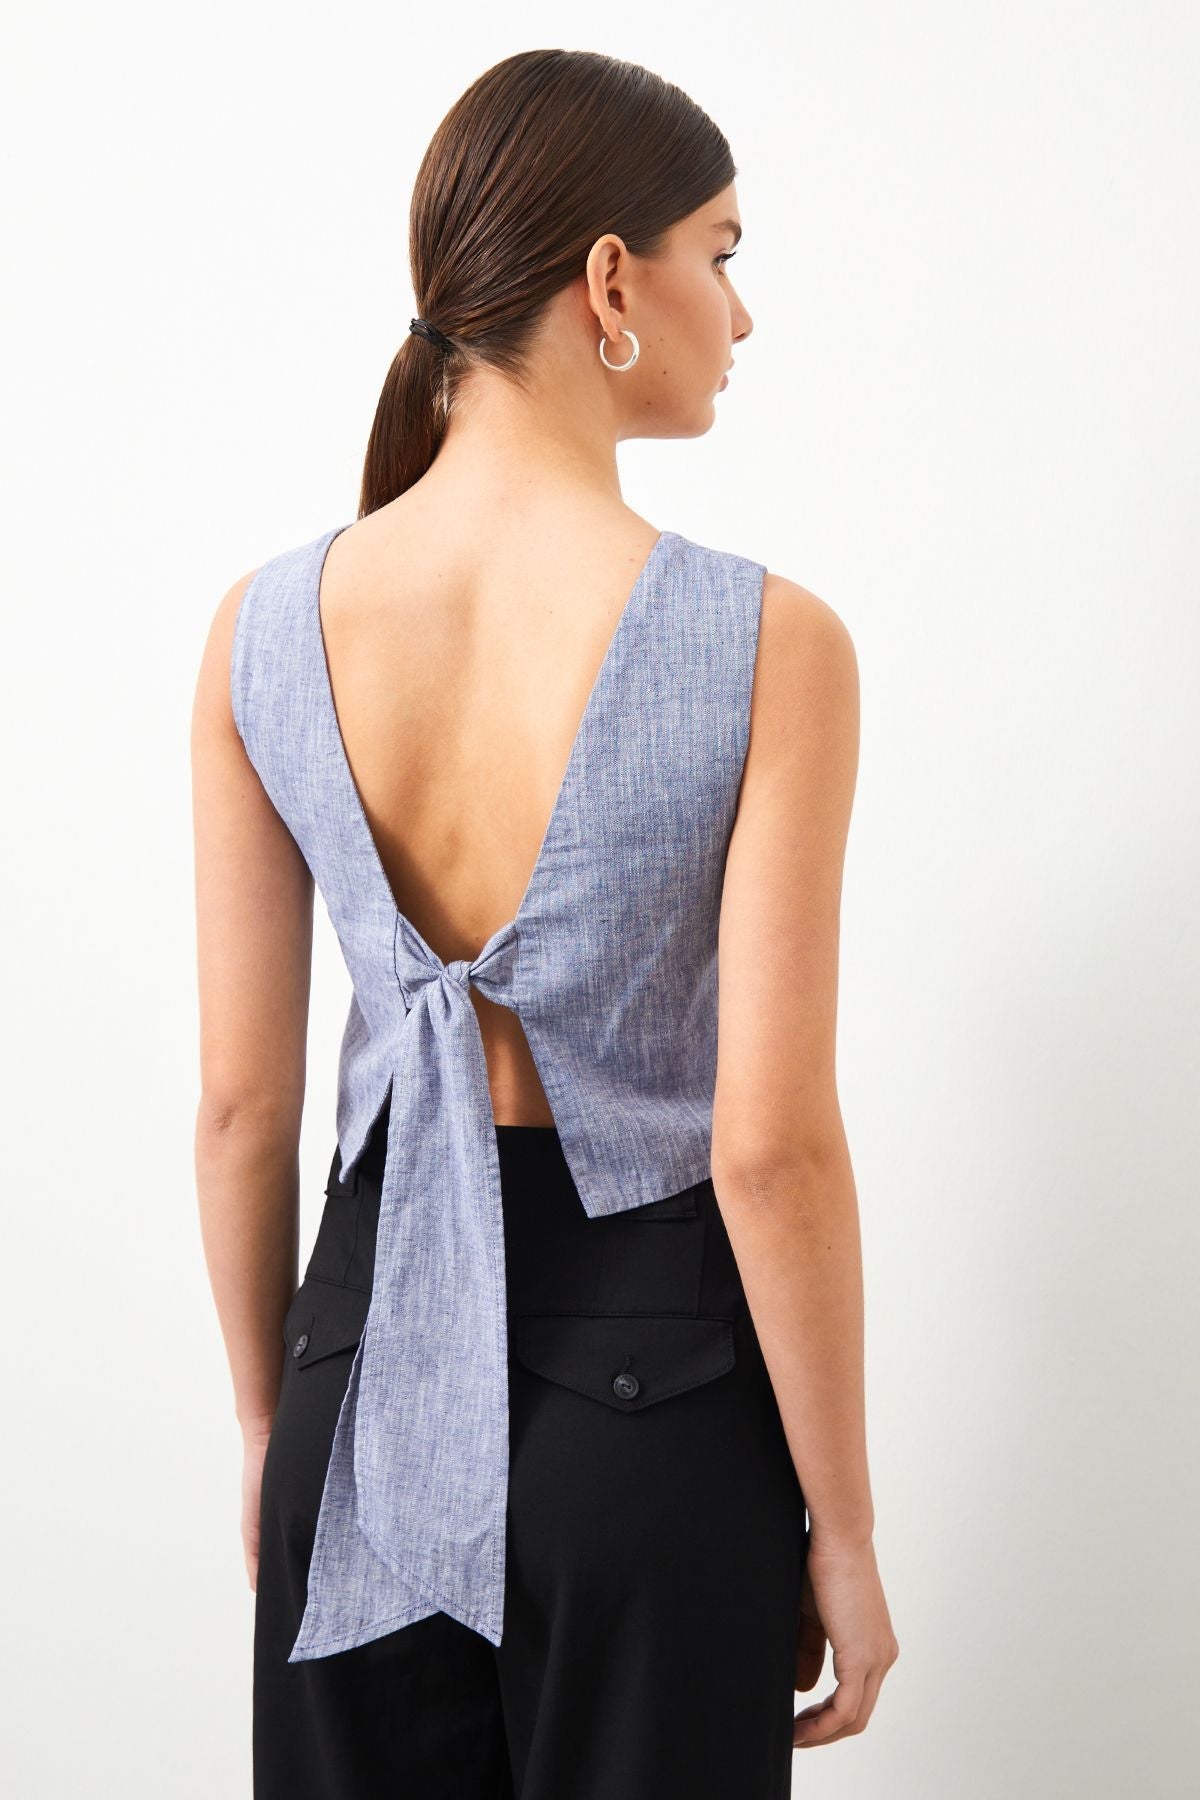 PERLA Blue Linen Blend Blouse featuring a bow at the back.